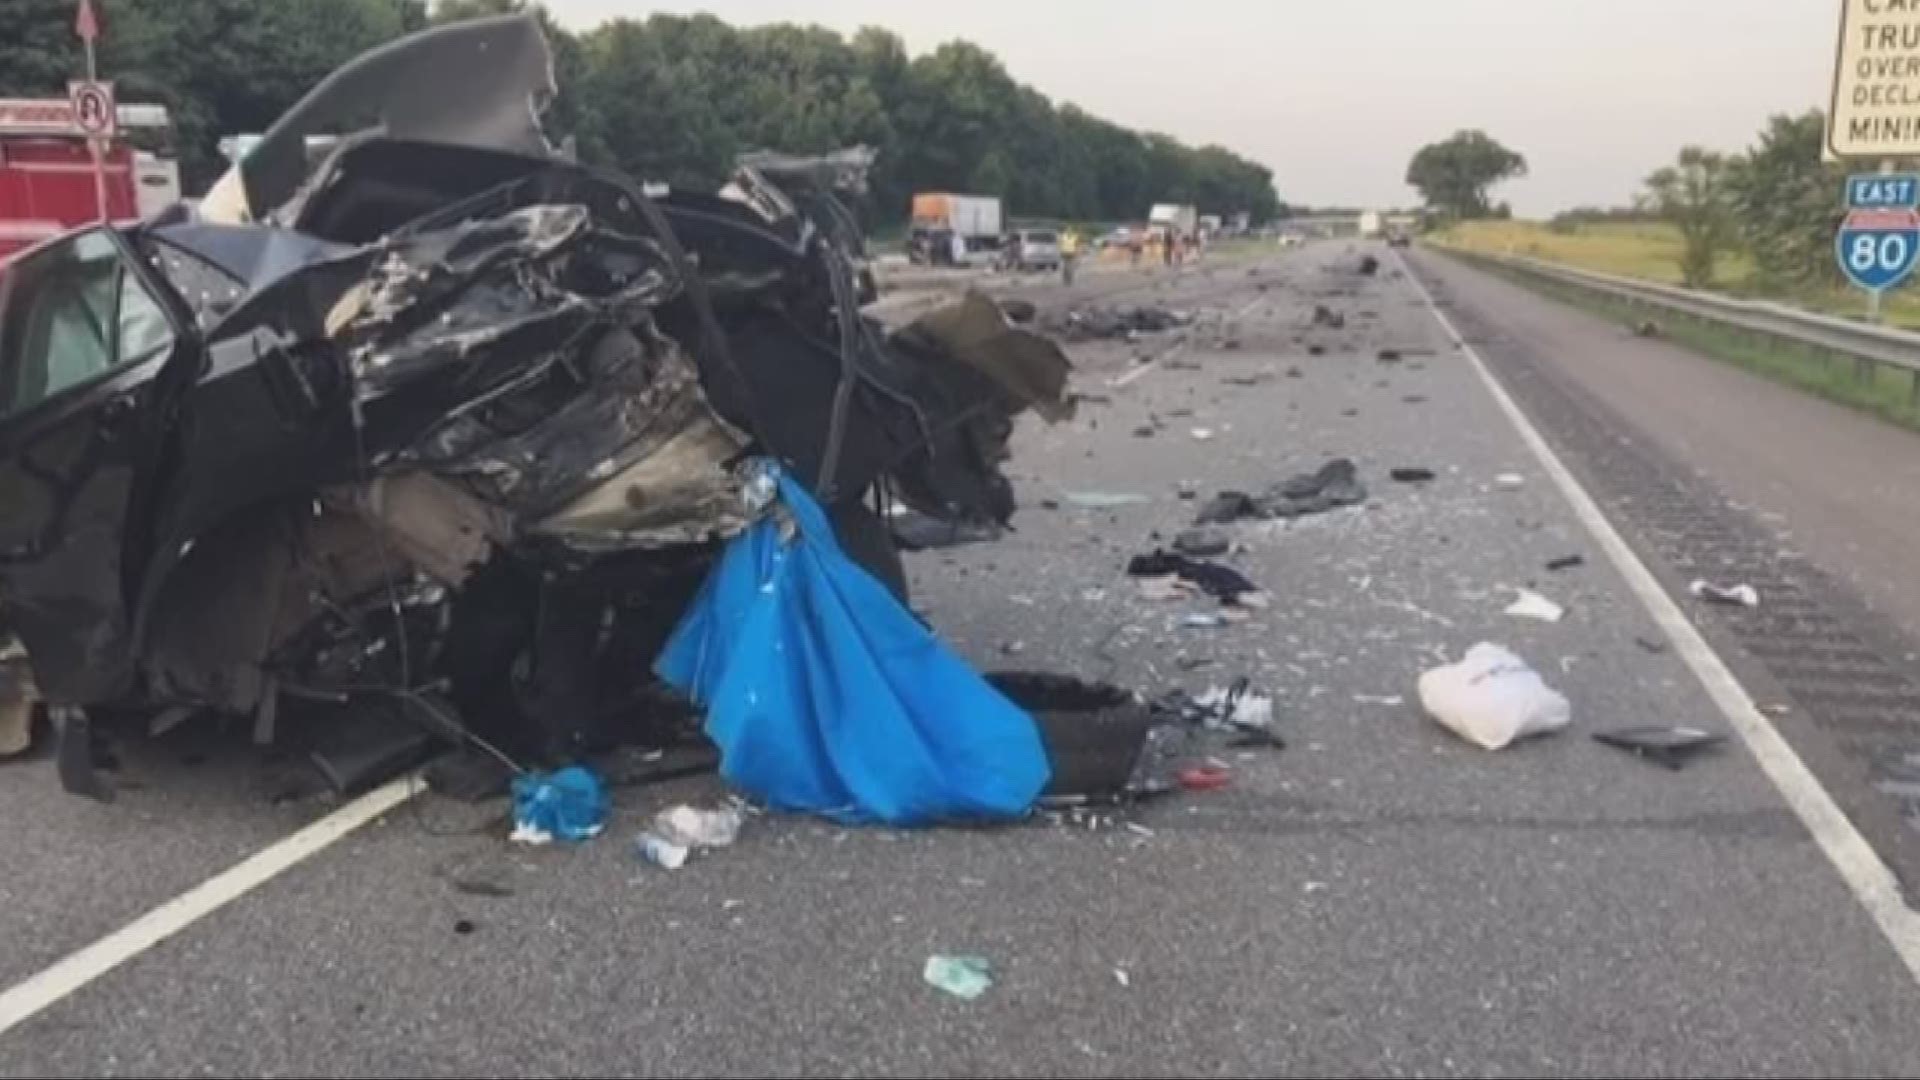 June 18, 2018: Tragedy in Indiana as three people from Painesville, Ohio, were killed in a crash.